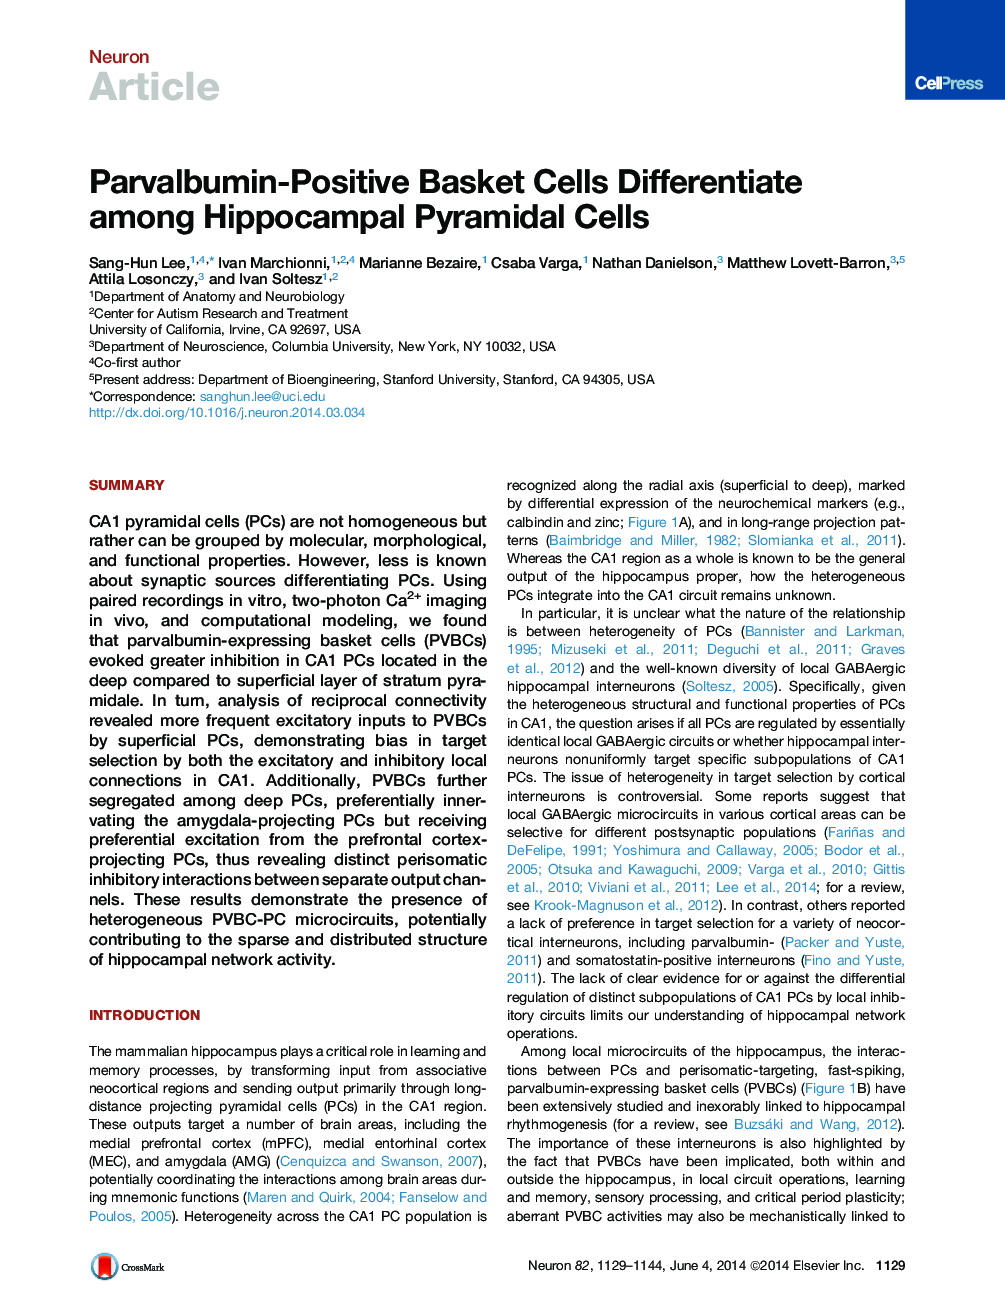 Parvalbumin-Positive Basket Cells Differentiate among Hippocampal Pyramidal Cells